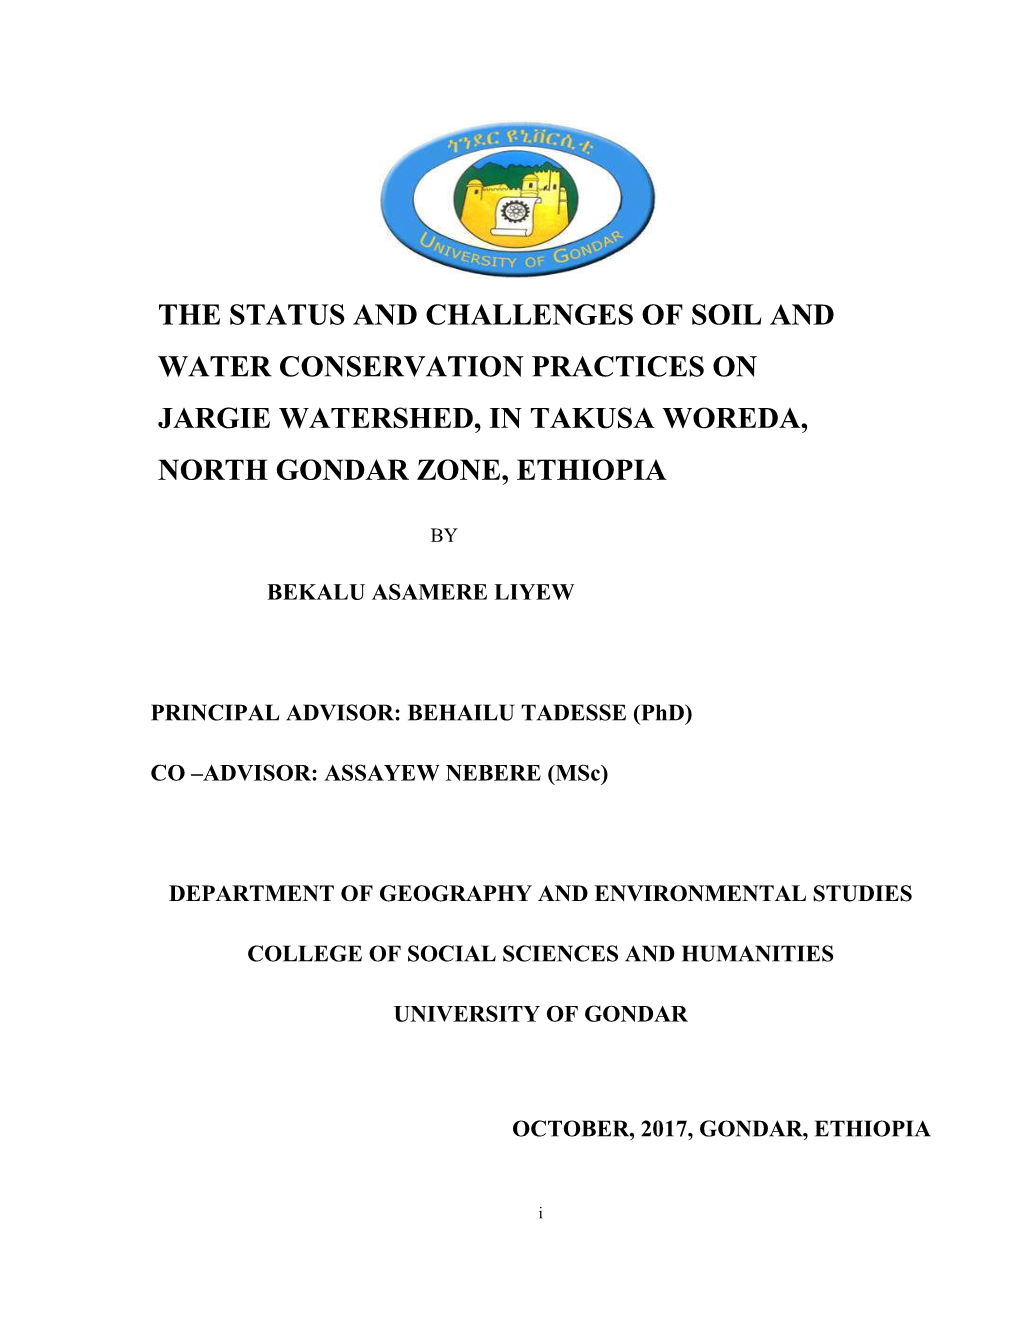 The Status and Challenges of Soil and Water Conservation Practices on Jargie Watershed, in Takusa Woreda, North Gondar Zone, Ethiopia